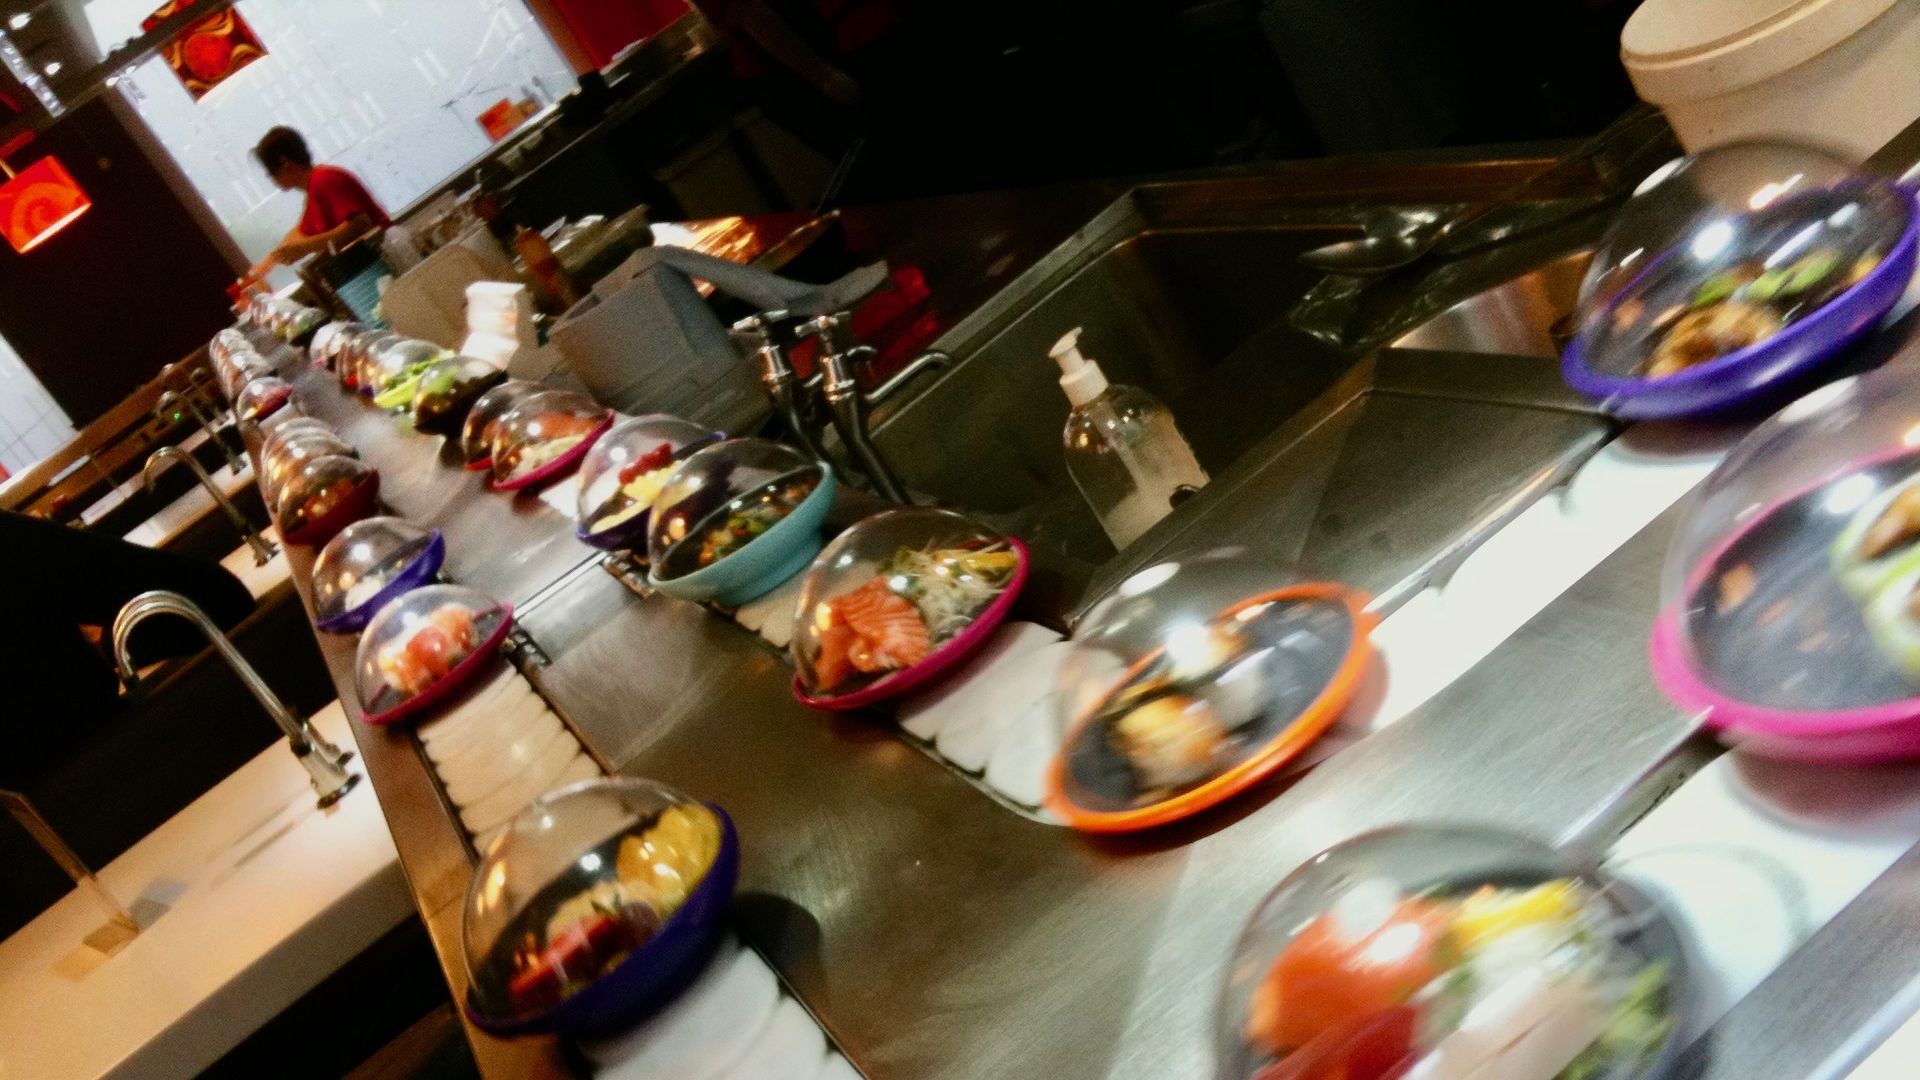 Meals on a conveyor belt at a sushi restaurant in London.